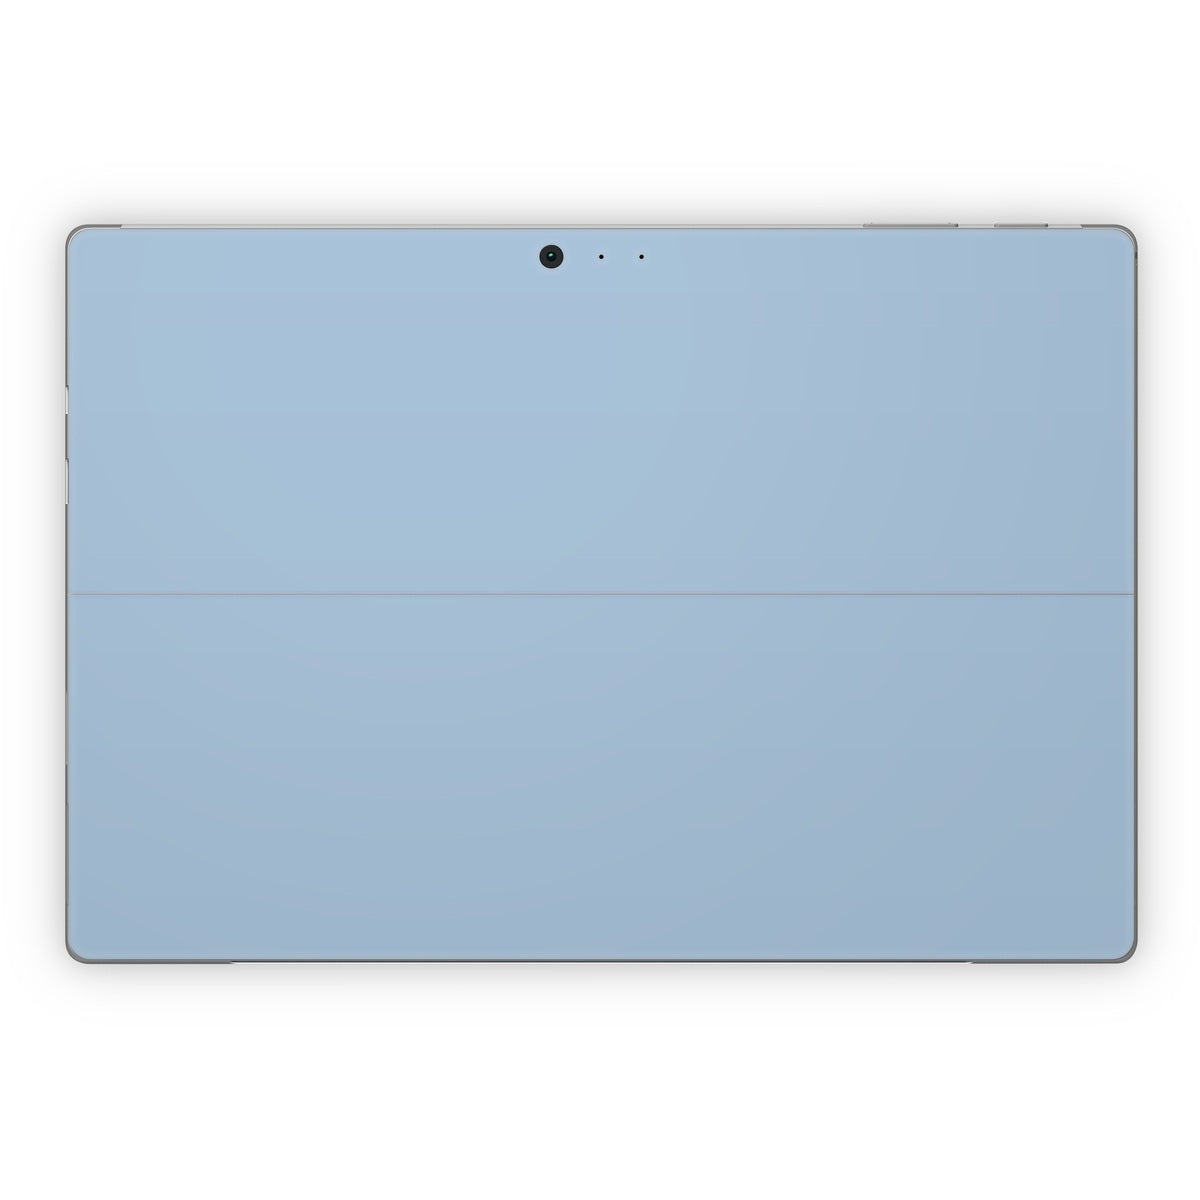 Solid State Blue Mist - Microsoft Surface Pro Skin